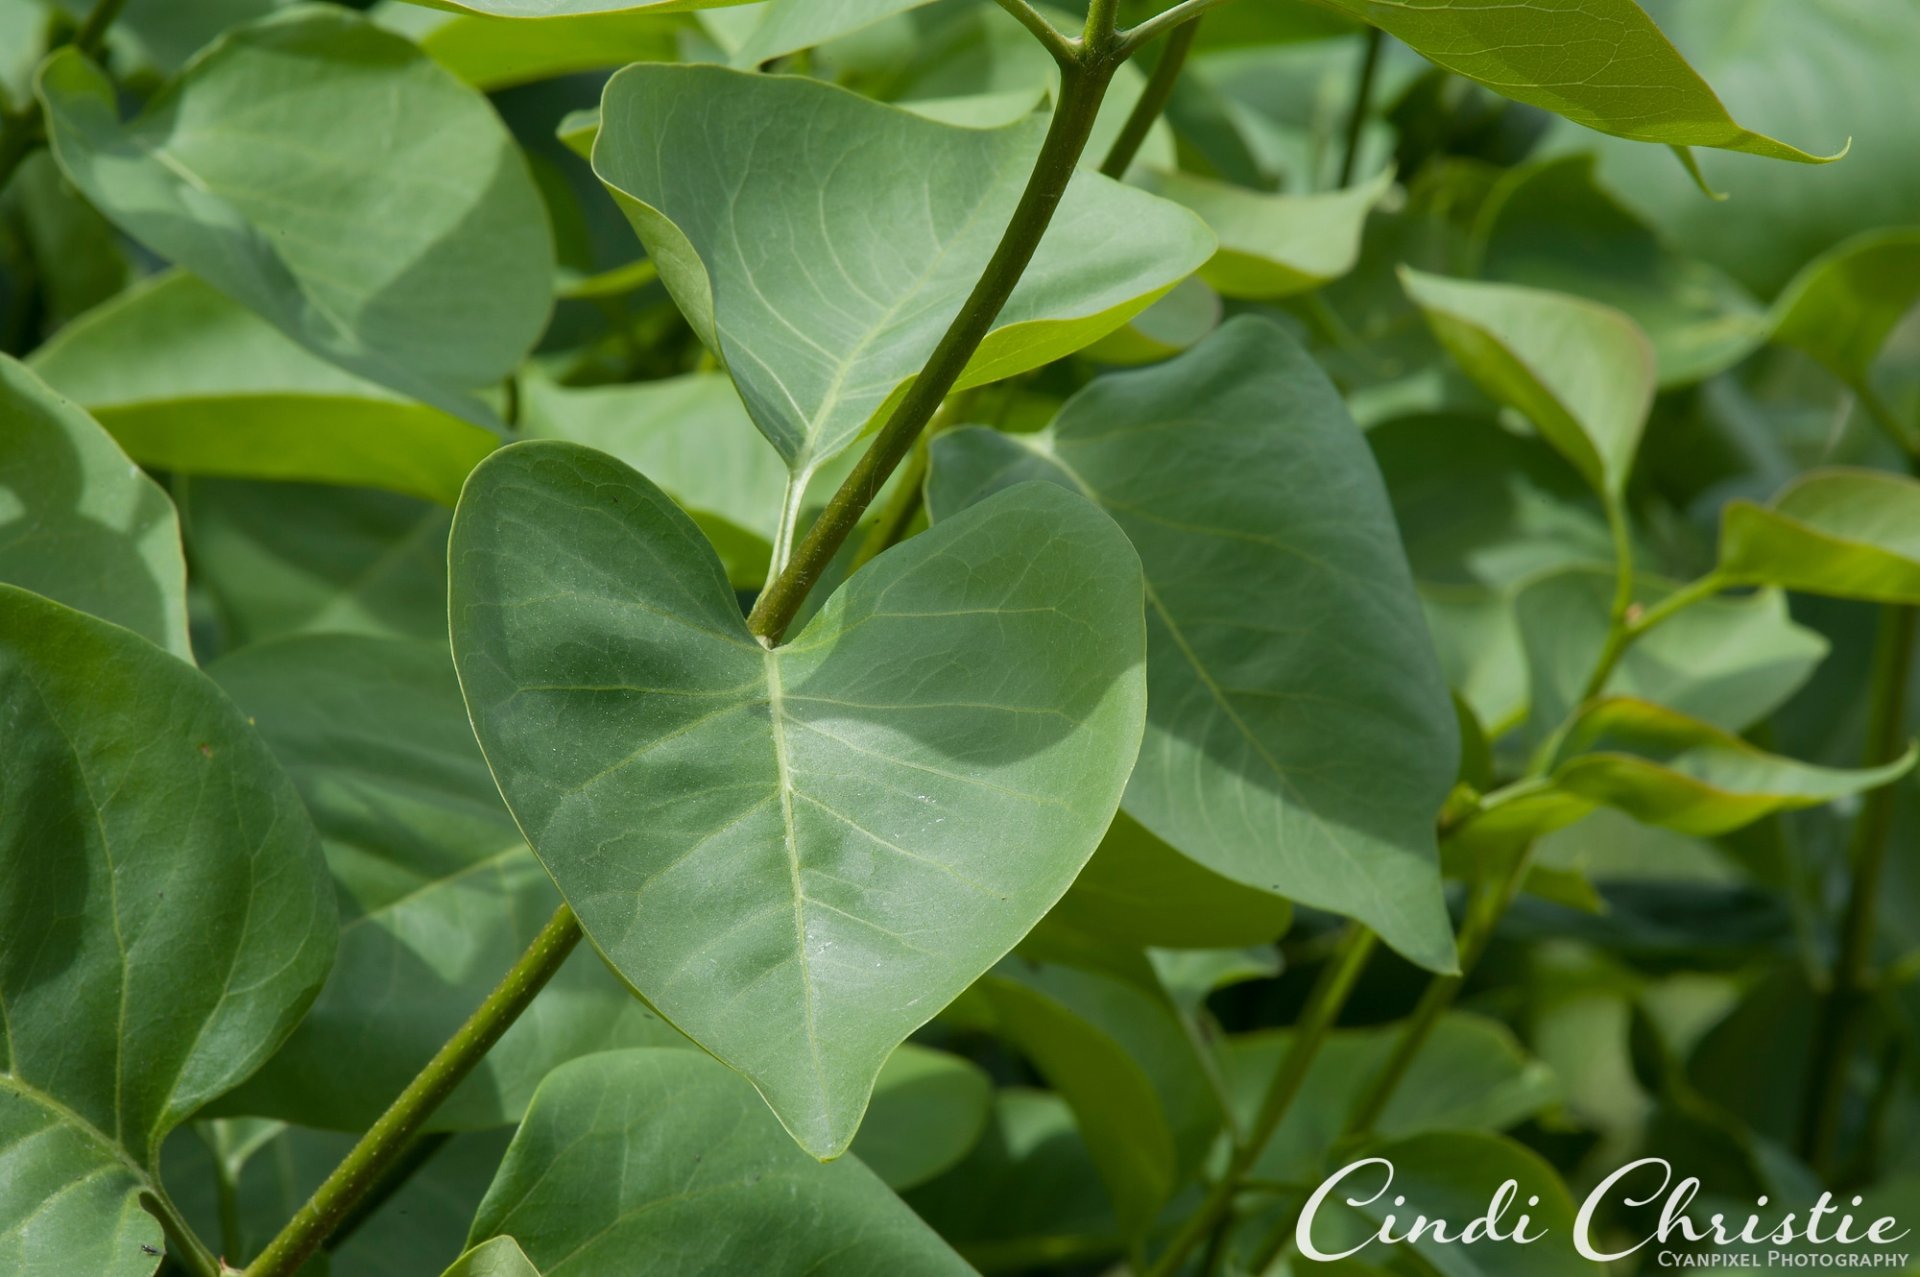 Heart-shaped leaves are plentiful on this lilac bush in Salmon, Idaho, on June 12, 2016.  (© 2016 Cindi Christie)